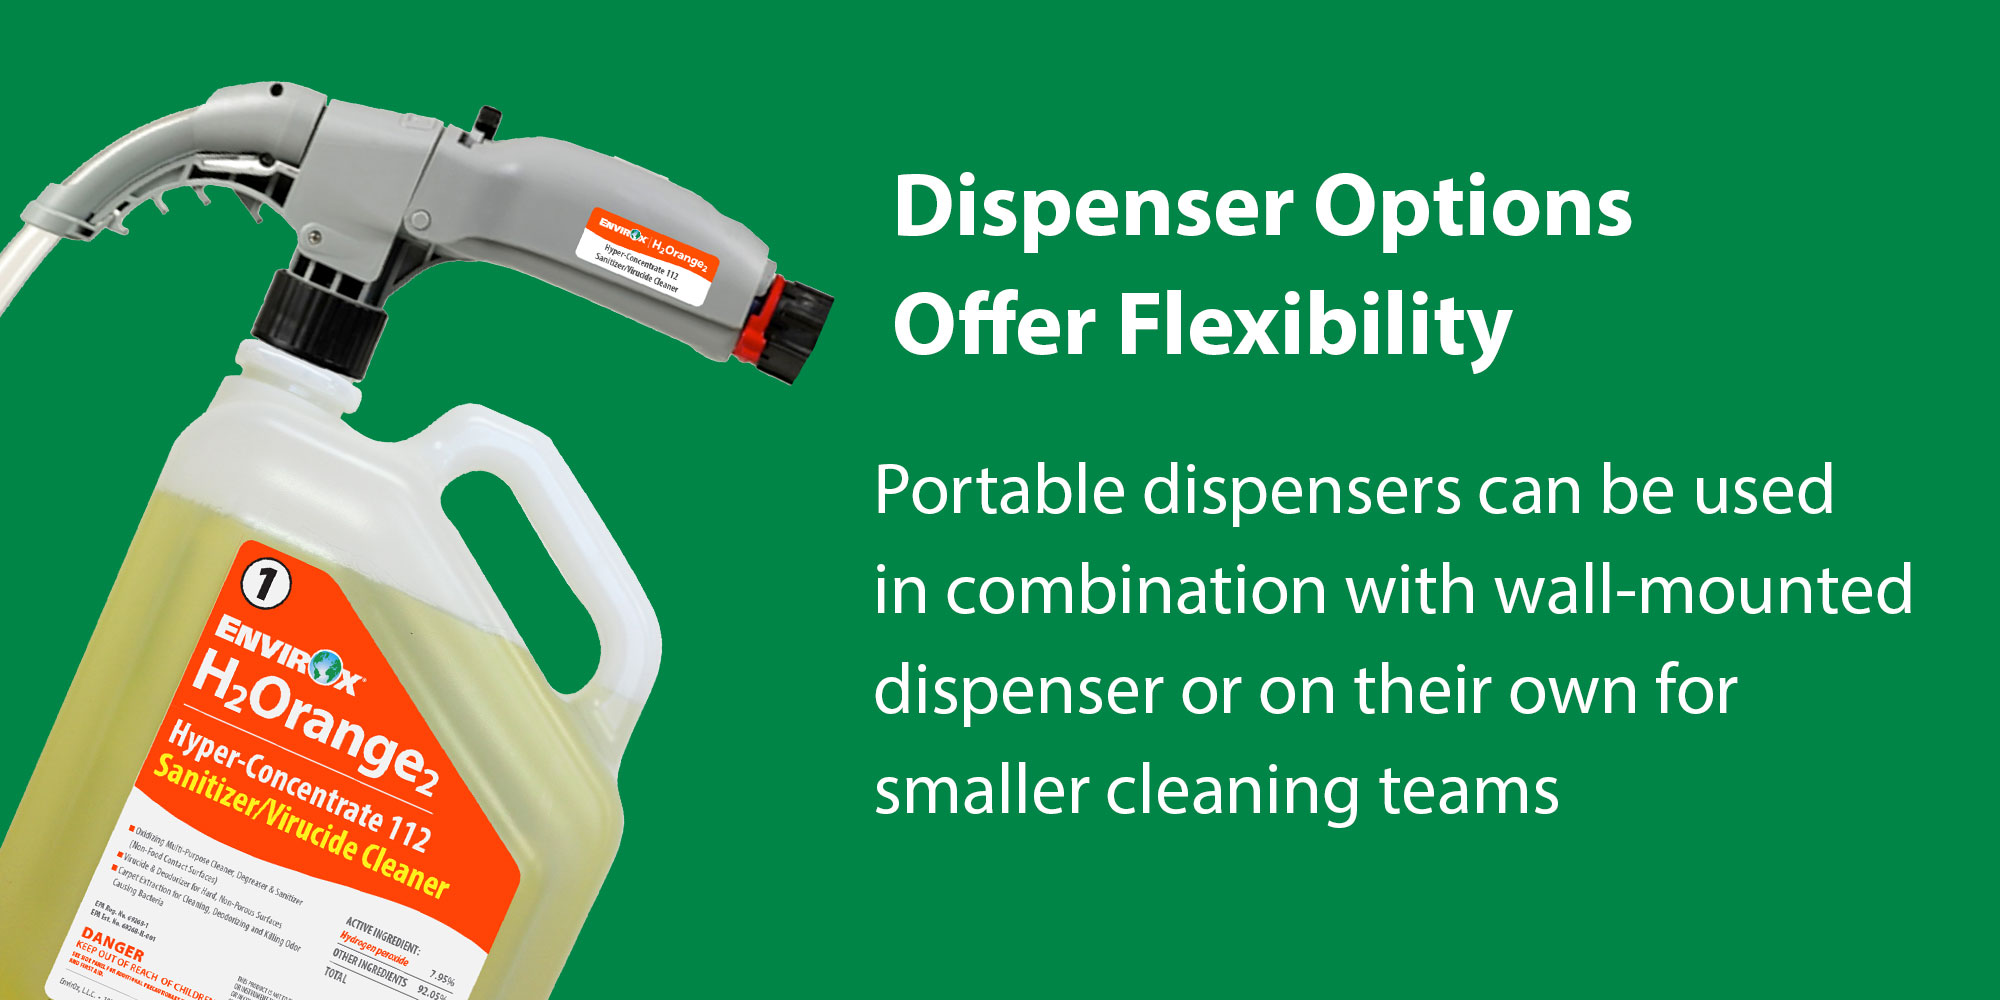 Dispenser Options Offer Flexibility: Portable dispensers can be used in combination with wall-mounted dispenser or on their own for smaller cleaning teams